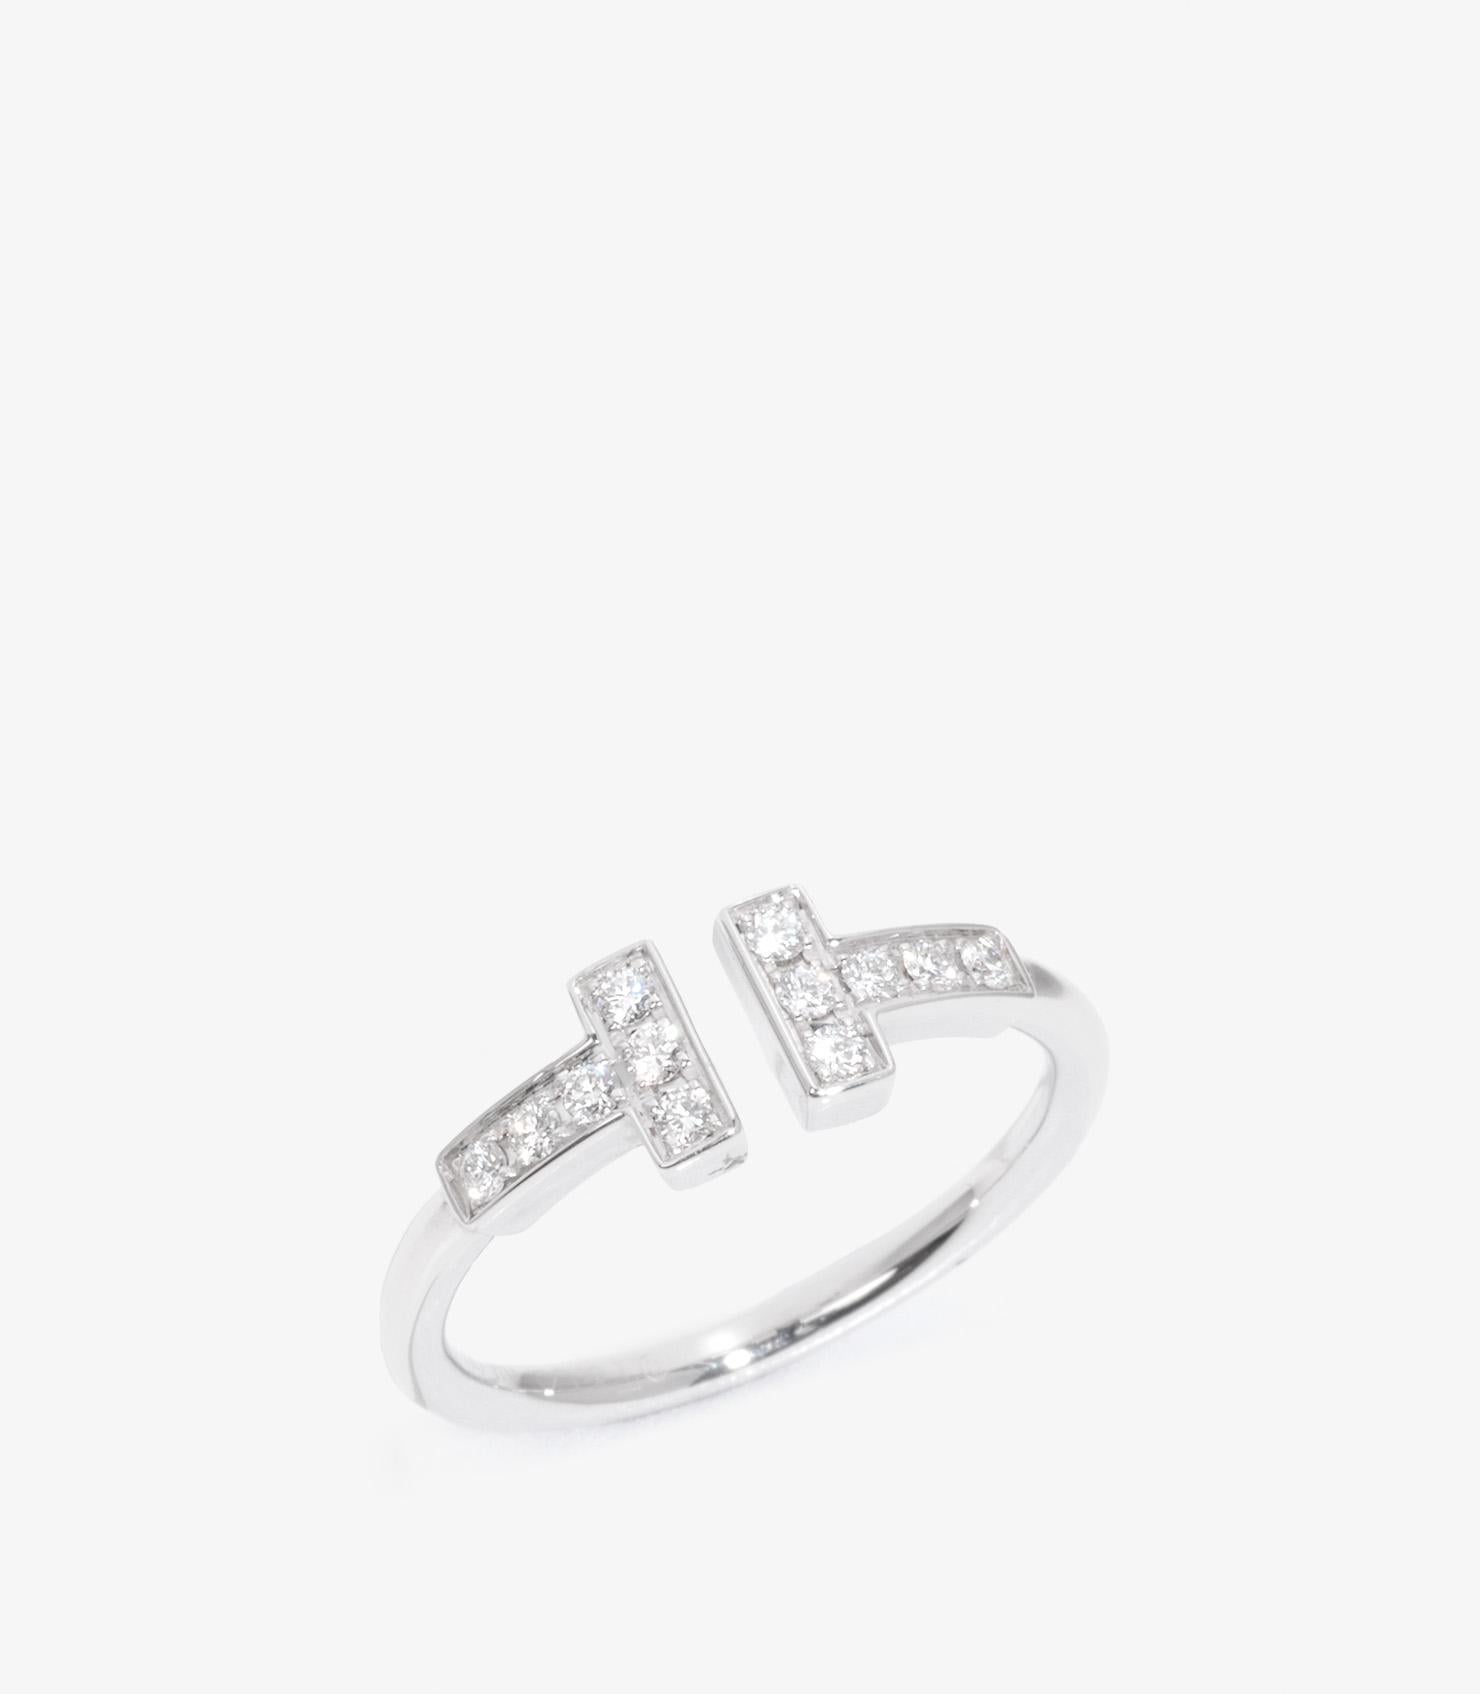 Tiffany & Co. Brilliant Cut Diamond 18ct White Gold T Wire Ring

Brand- Tiffany & Co.
Model- Tiffany T Wire Ring
Product Type- Ring
Accompanied By- Tiffany & Co. Box
Material(s)- 18ct White Gold
Gemstone- Diamond
UK Ring Size- J
EU Ring Size- 49
US